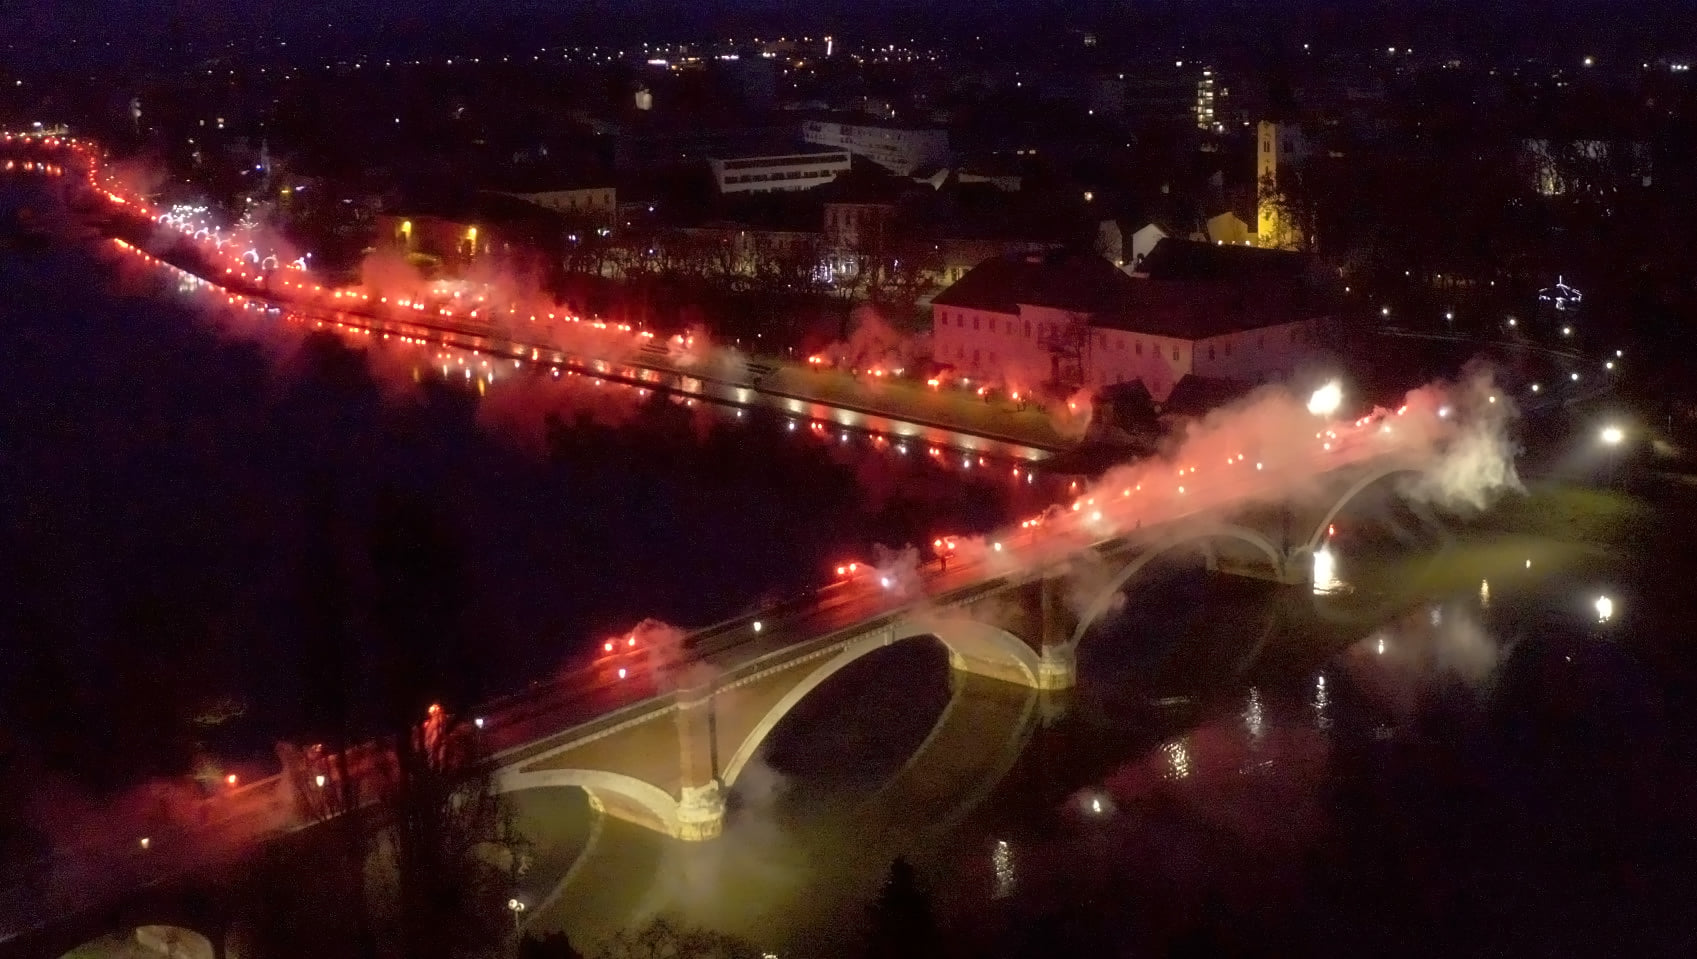 Residents of Sisak light torches to thank emergency services for assistance